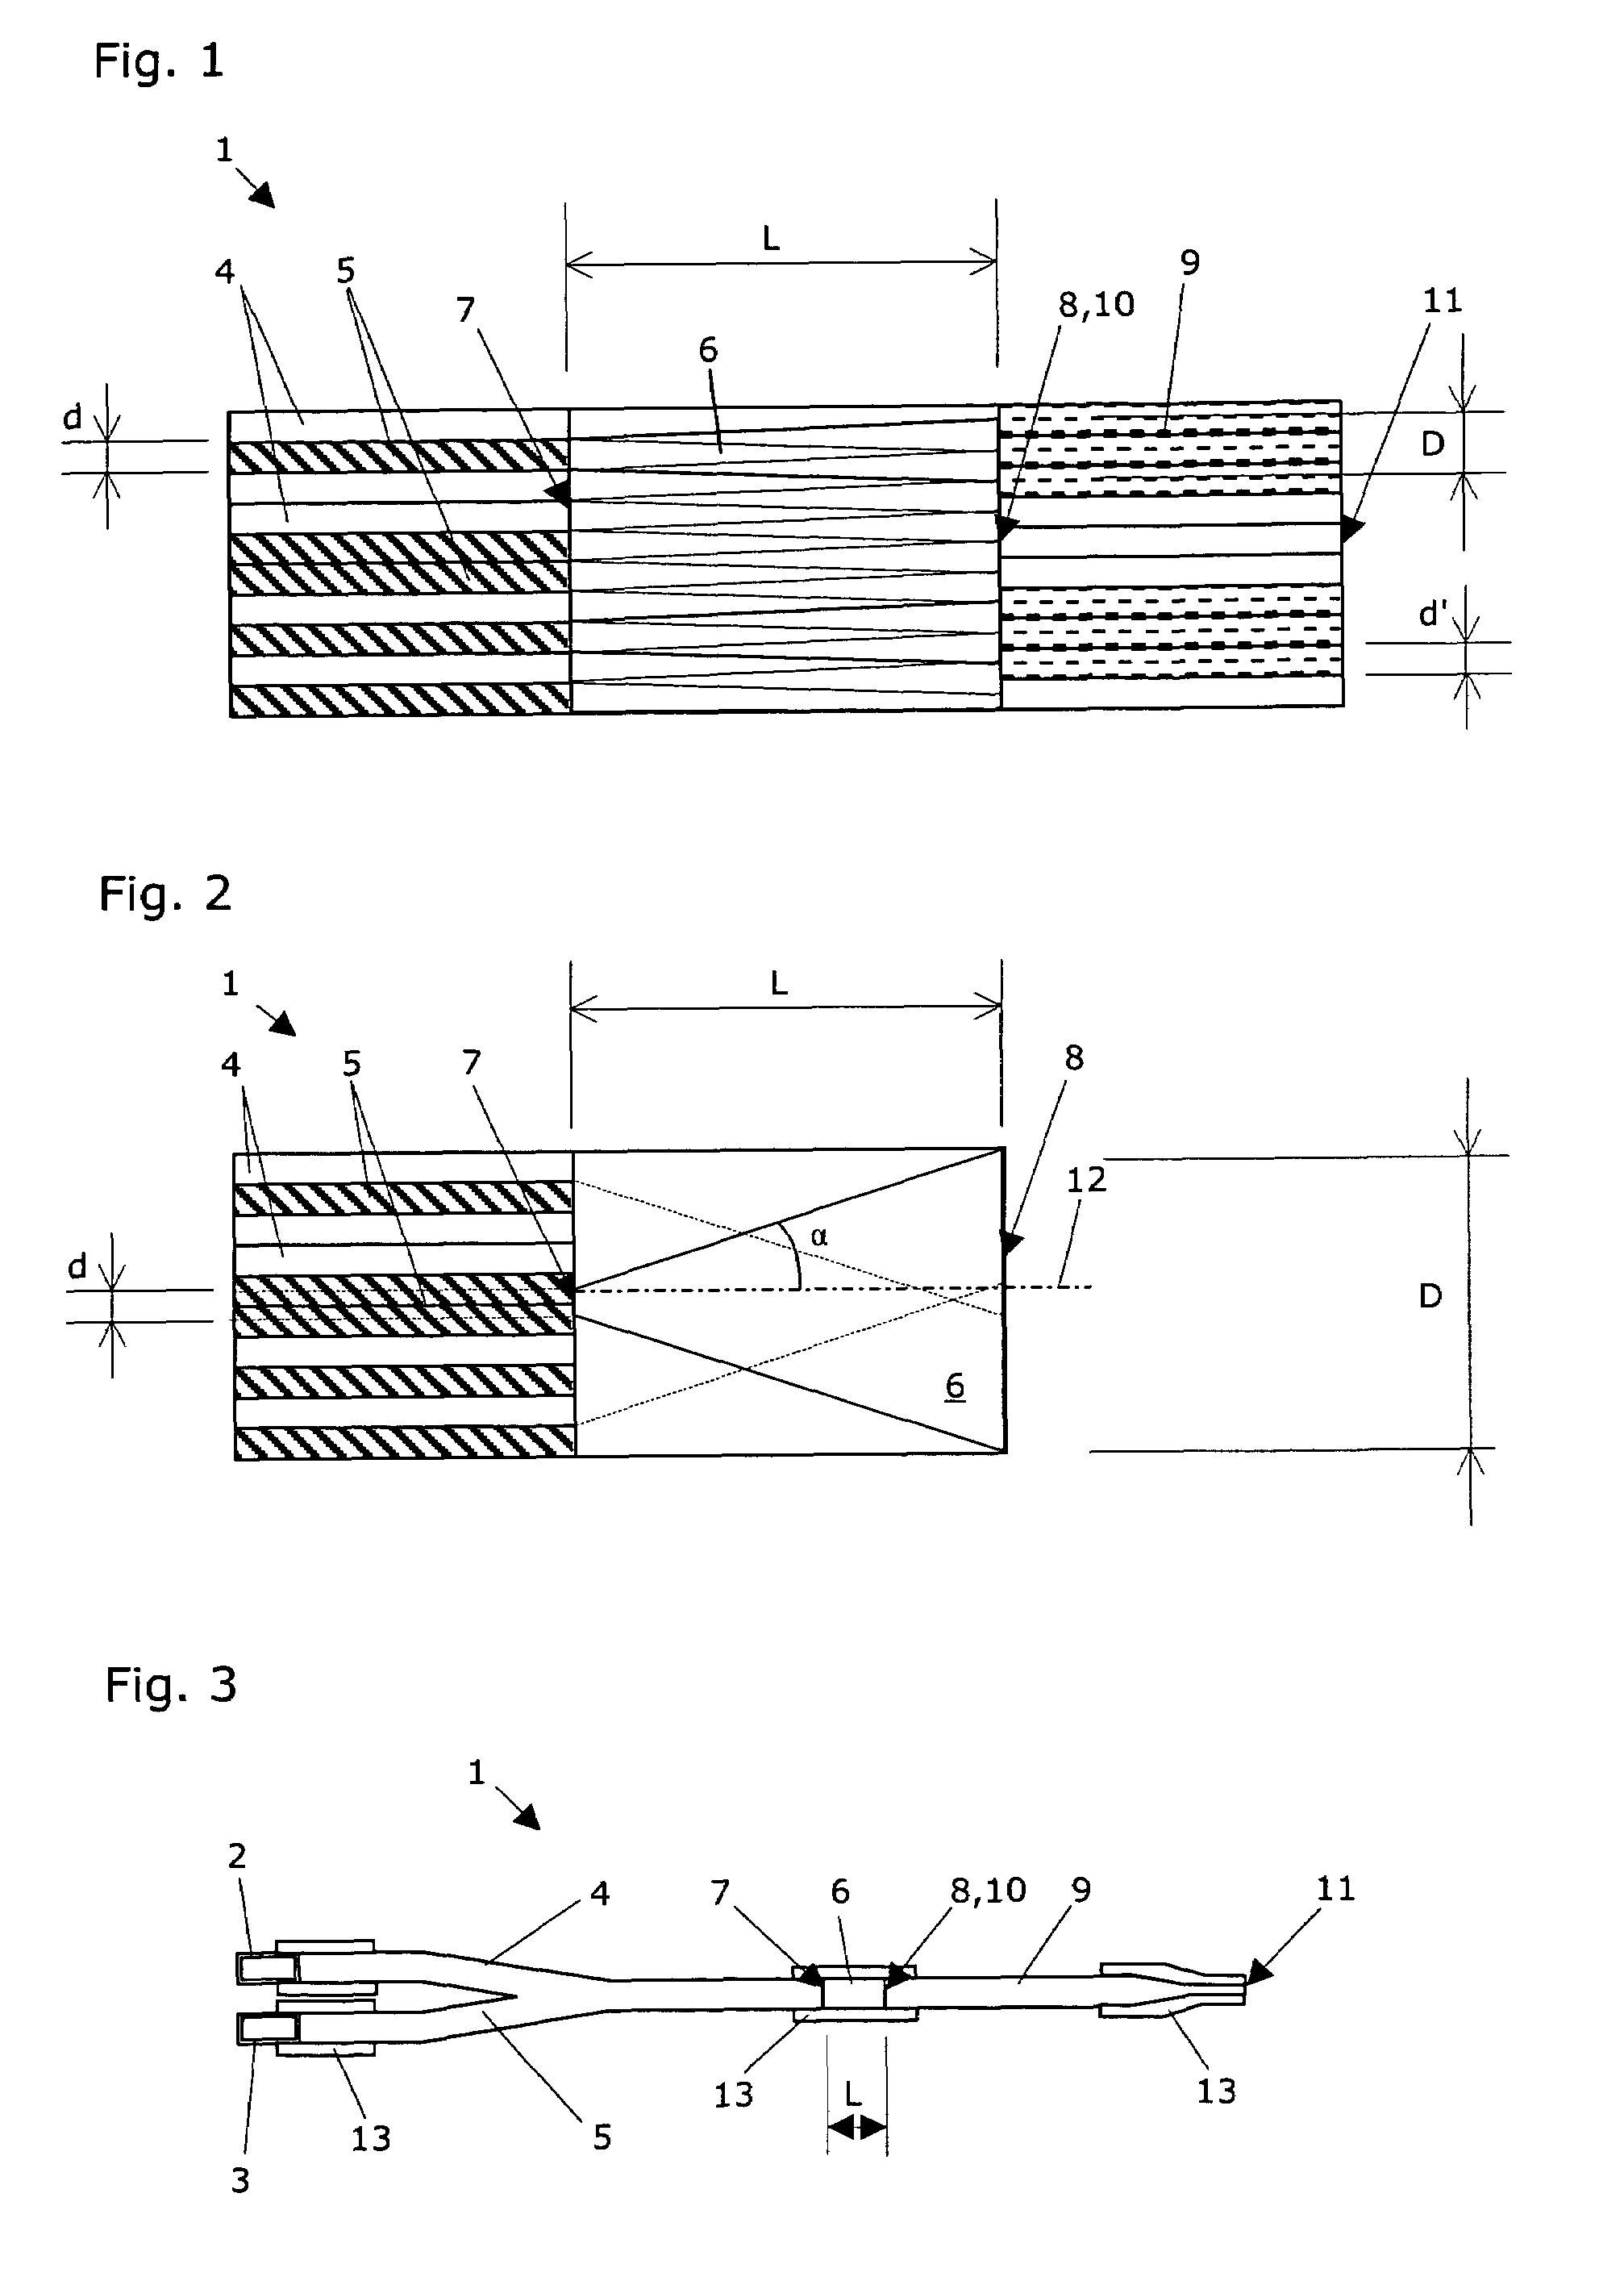 System, method, and computer program for conducting optical transmission measurements and evaluating determined measuring variables